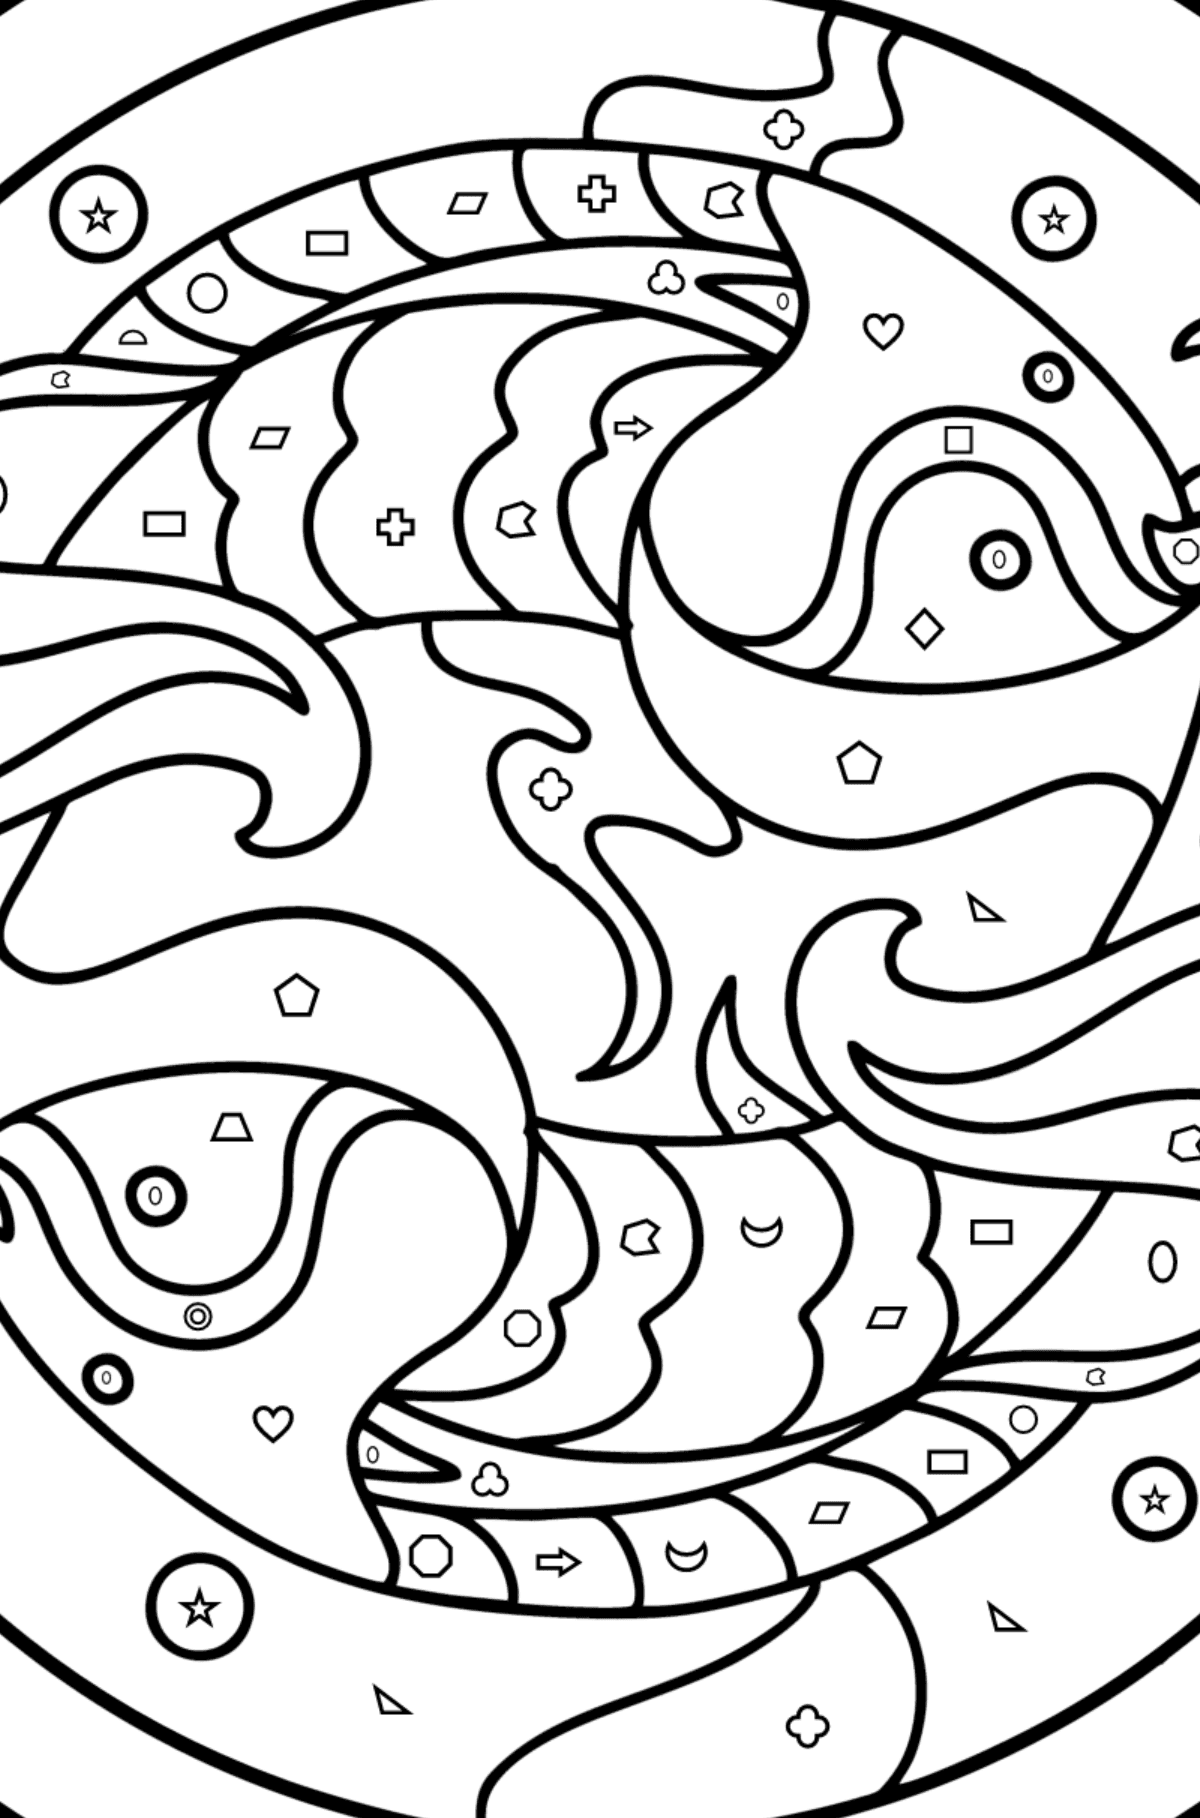 Coloring page for kids - zodiac sign Pisces - Coloring by Geometric Shapes for Kids